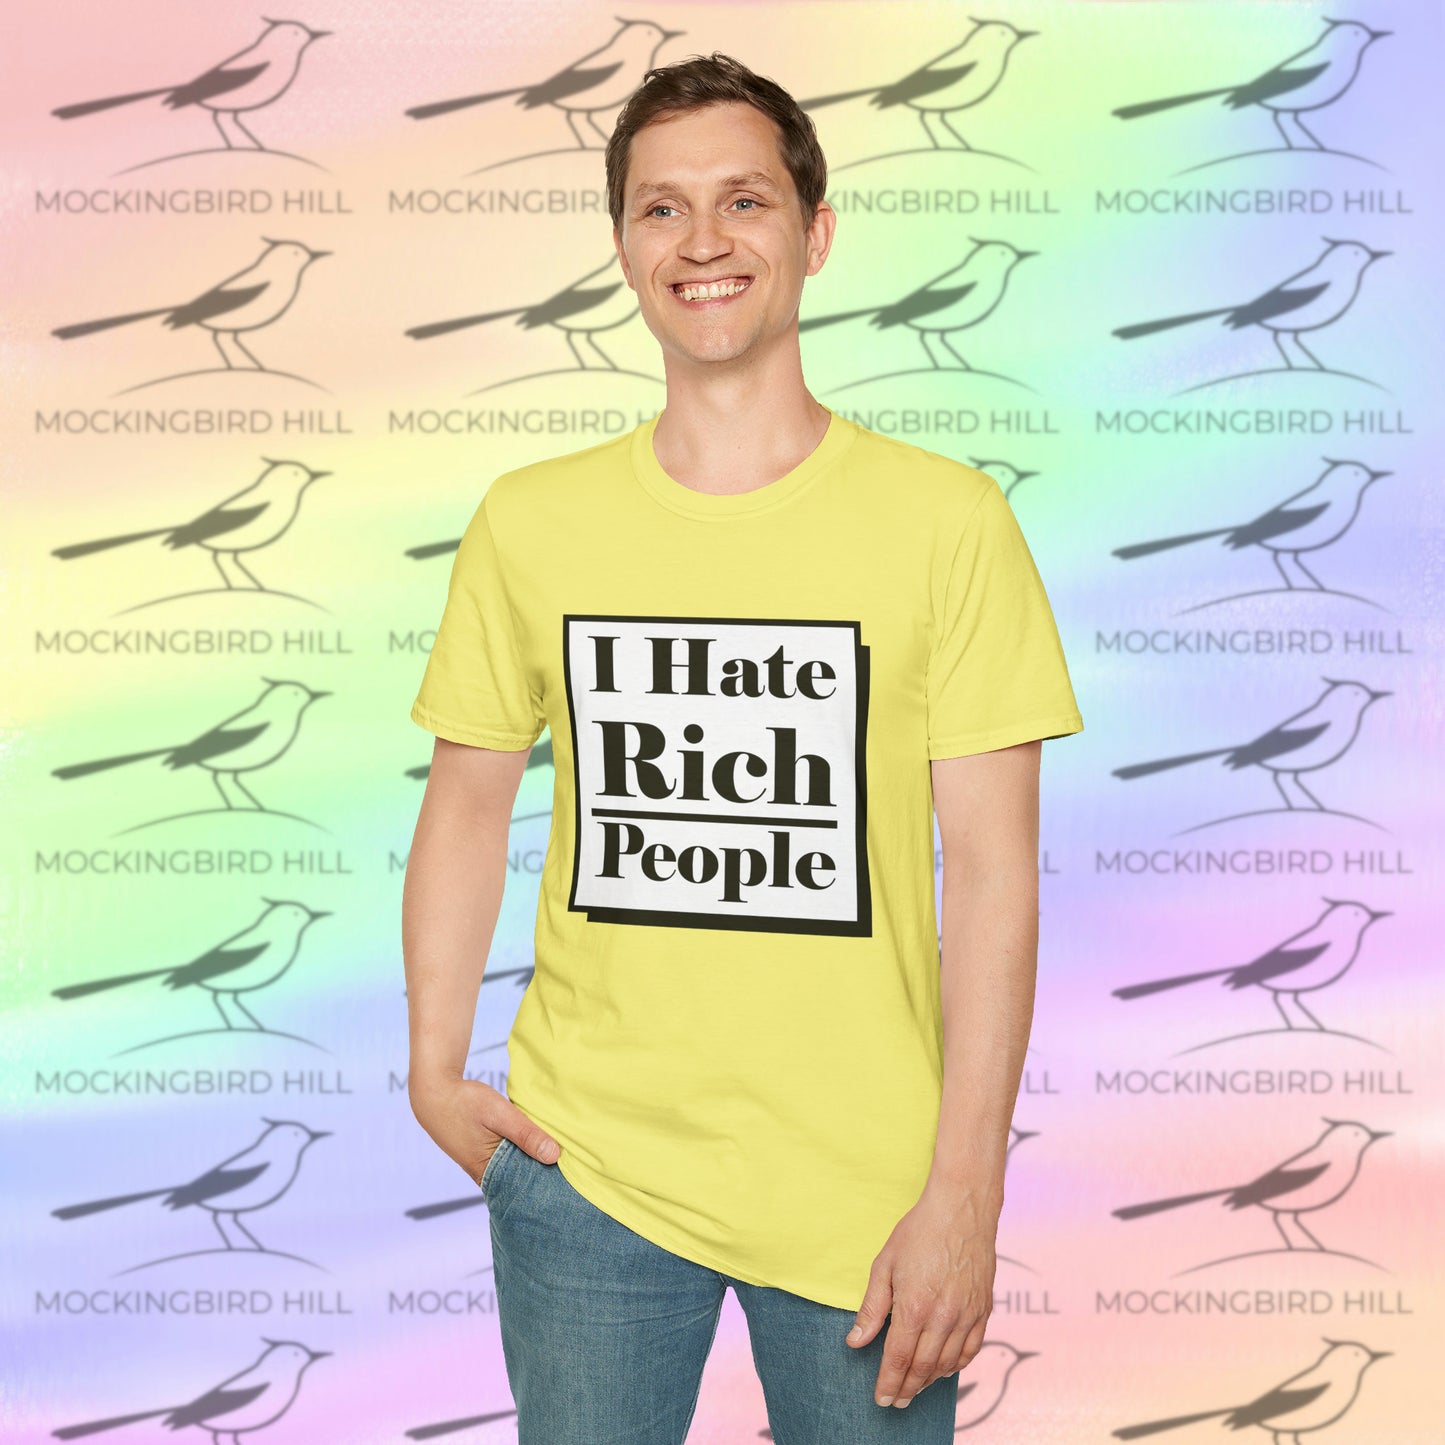 "I Hate Rich People" Tee